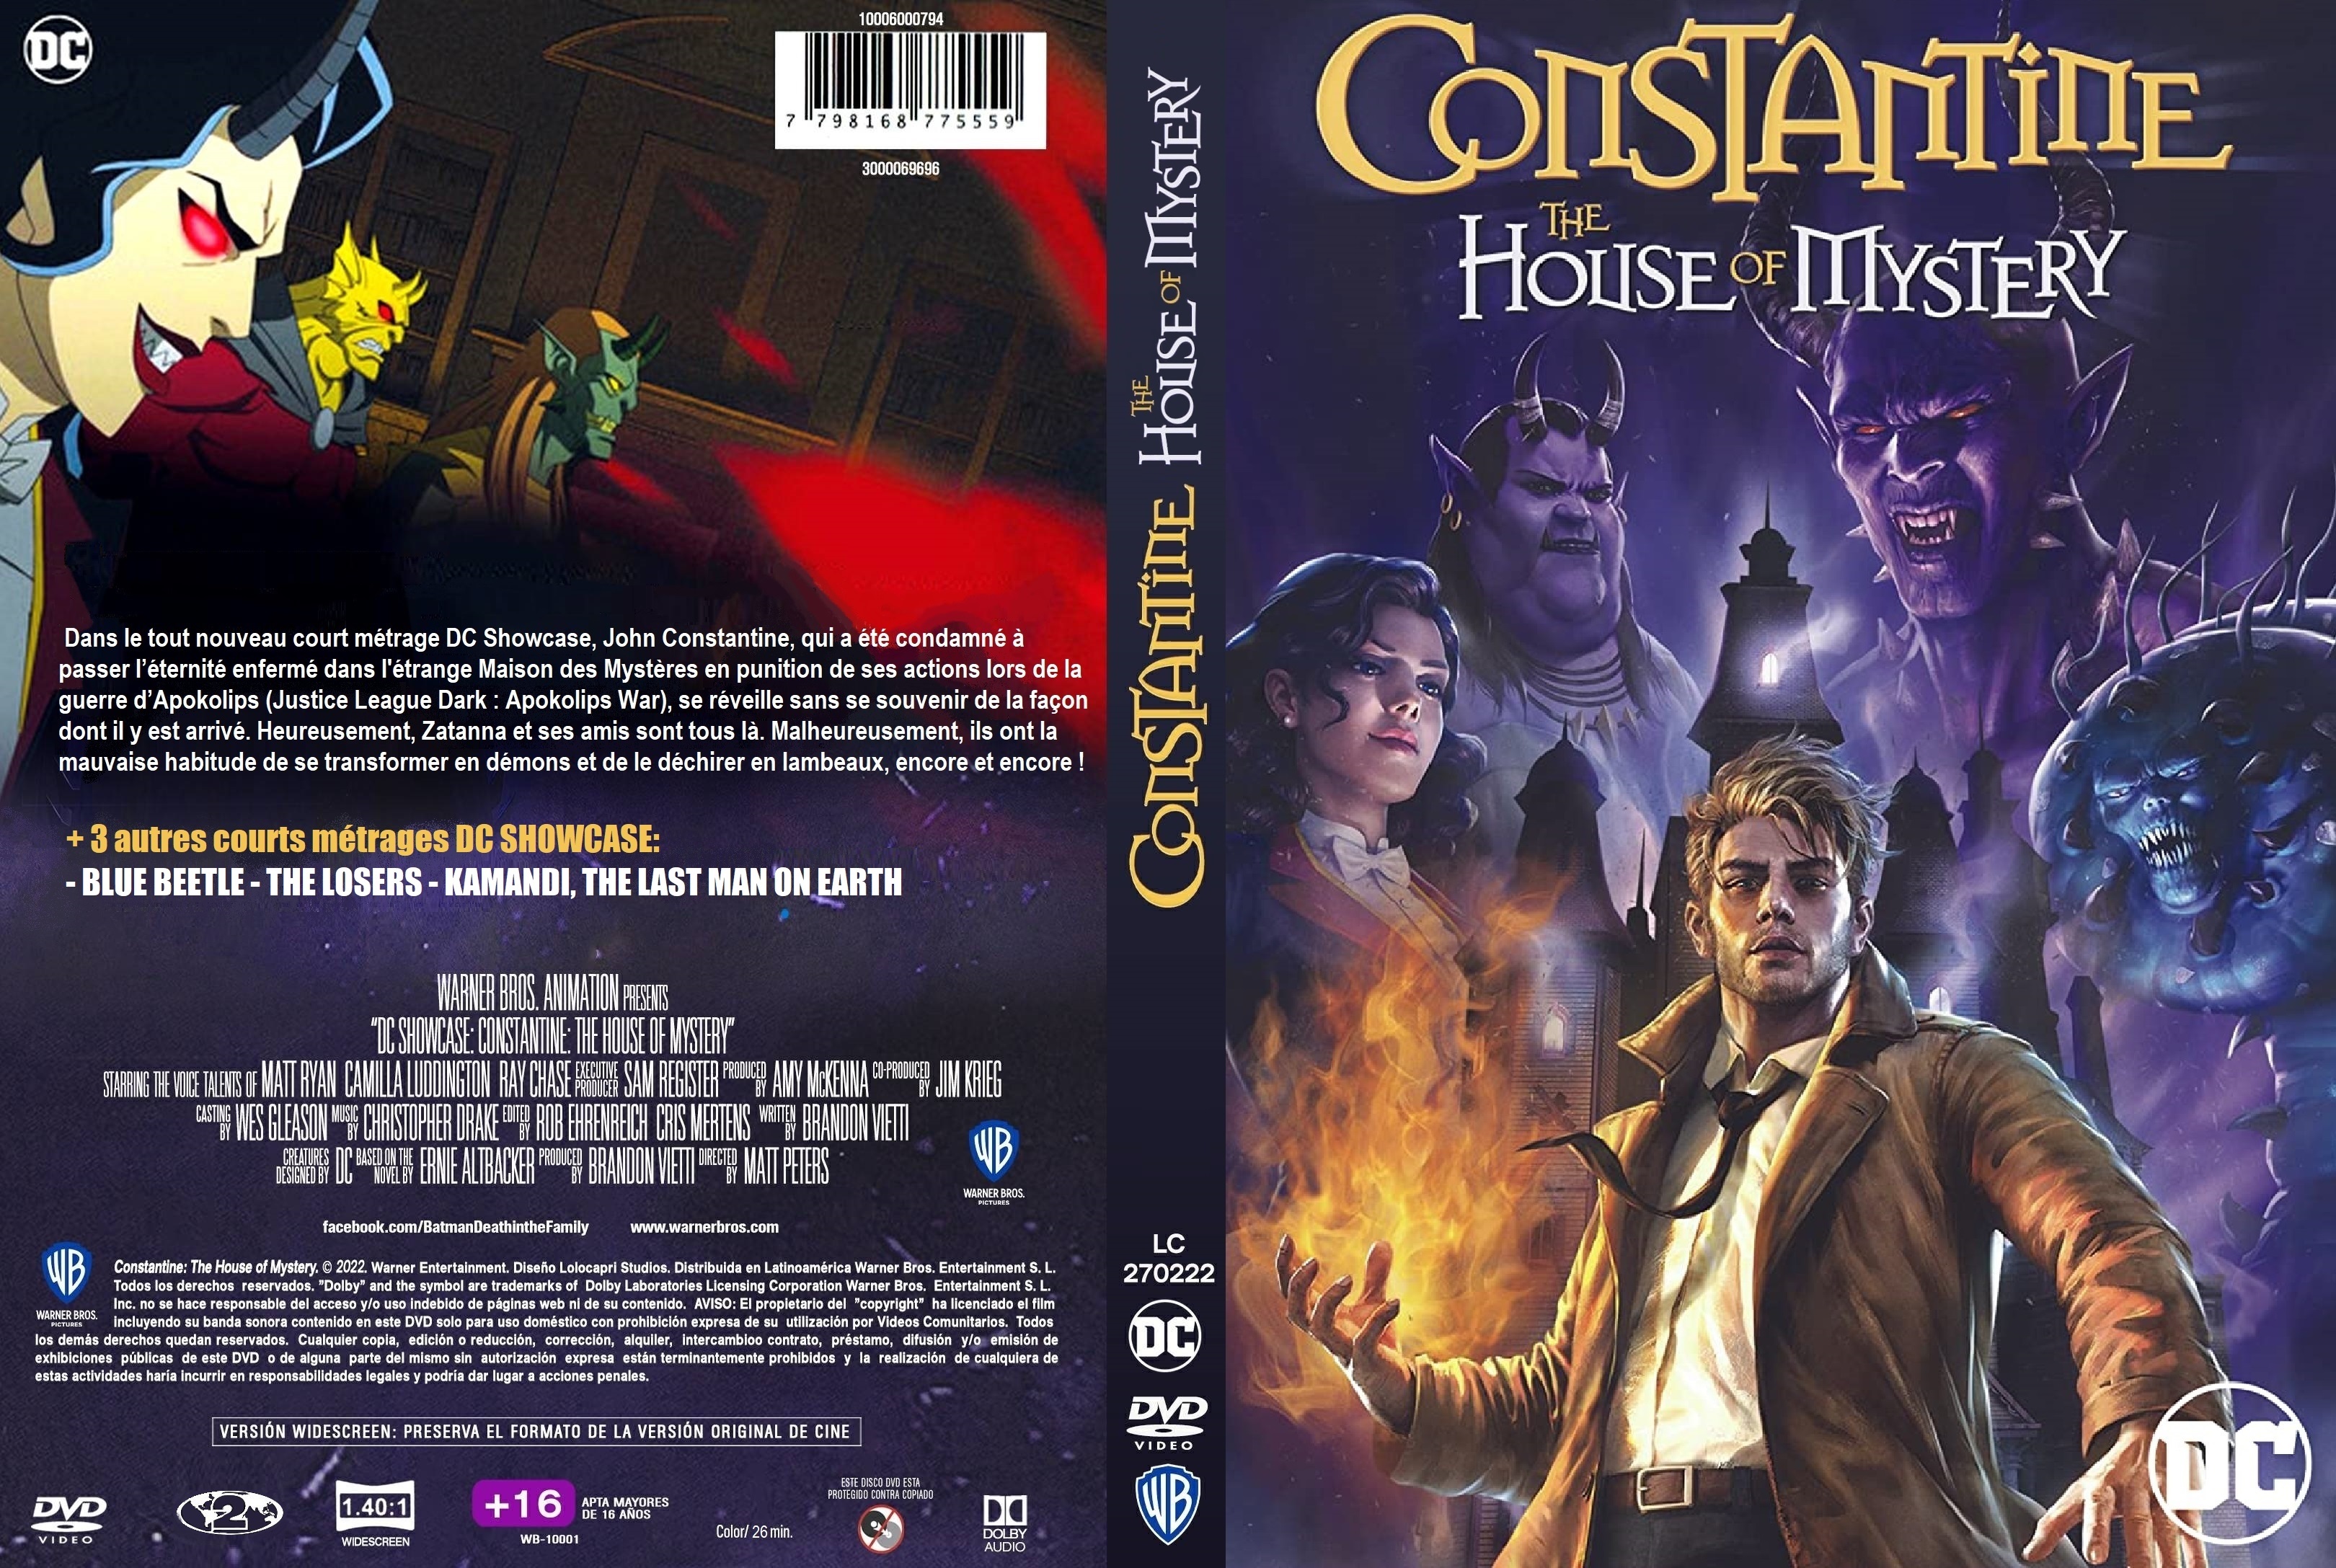 Jaquette DVD Constantine The House of Mystery custom